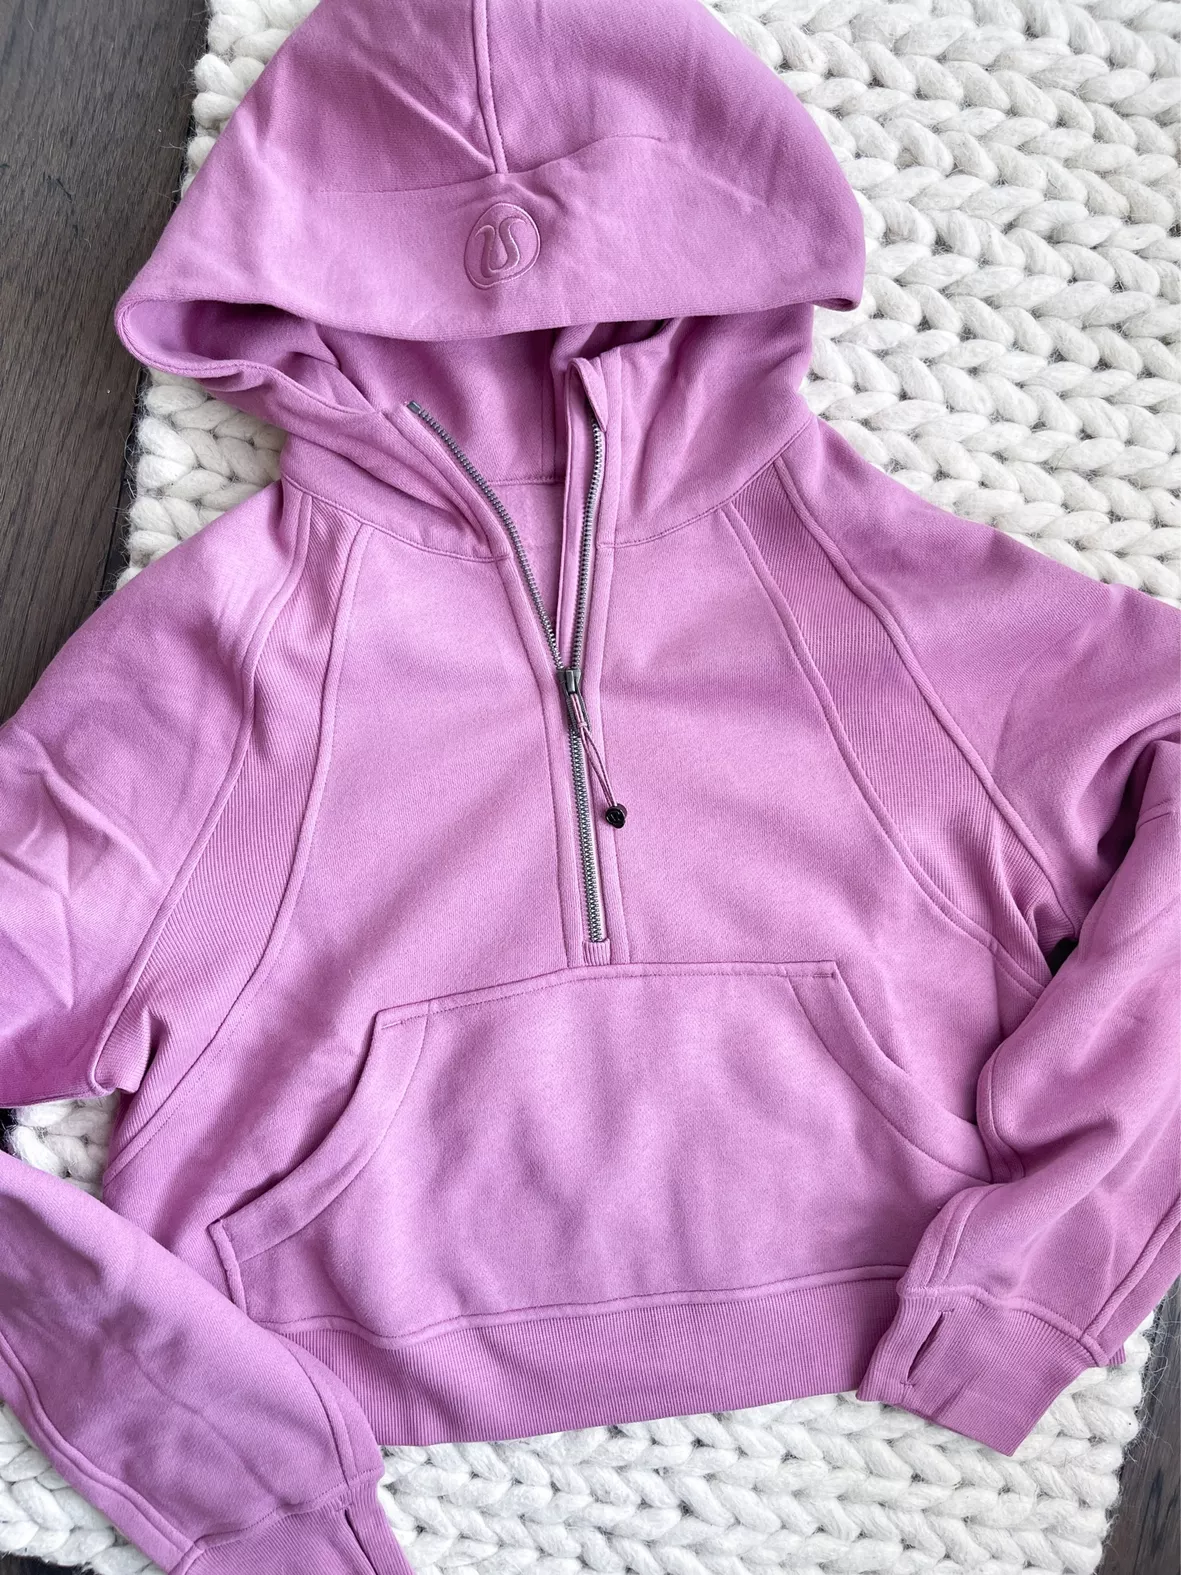 The popular oversized Scuba Hoodie from Lululemon is now under